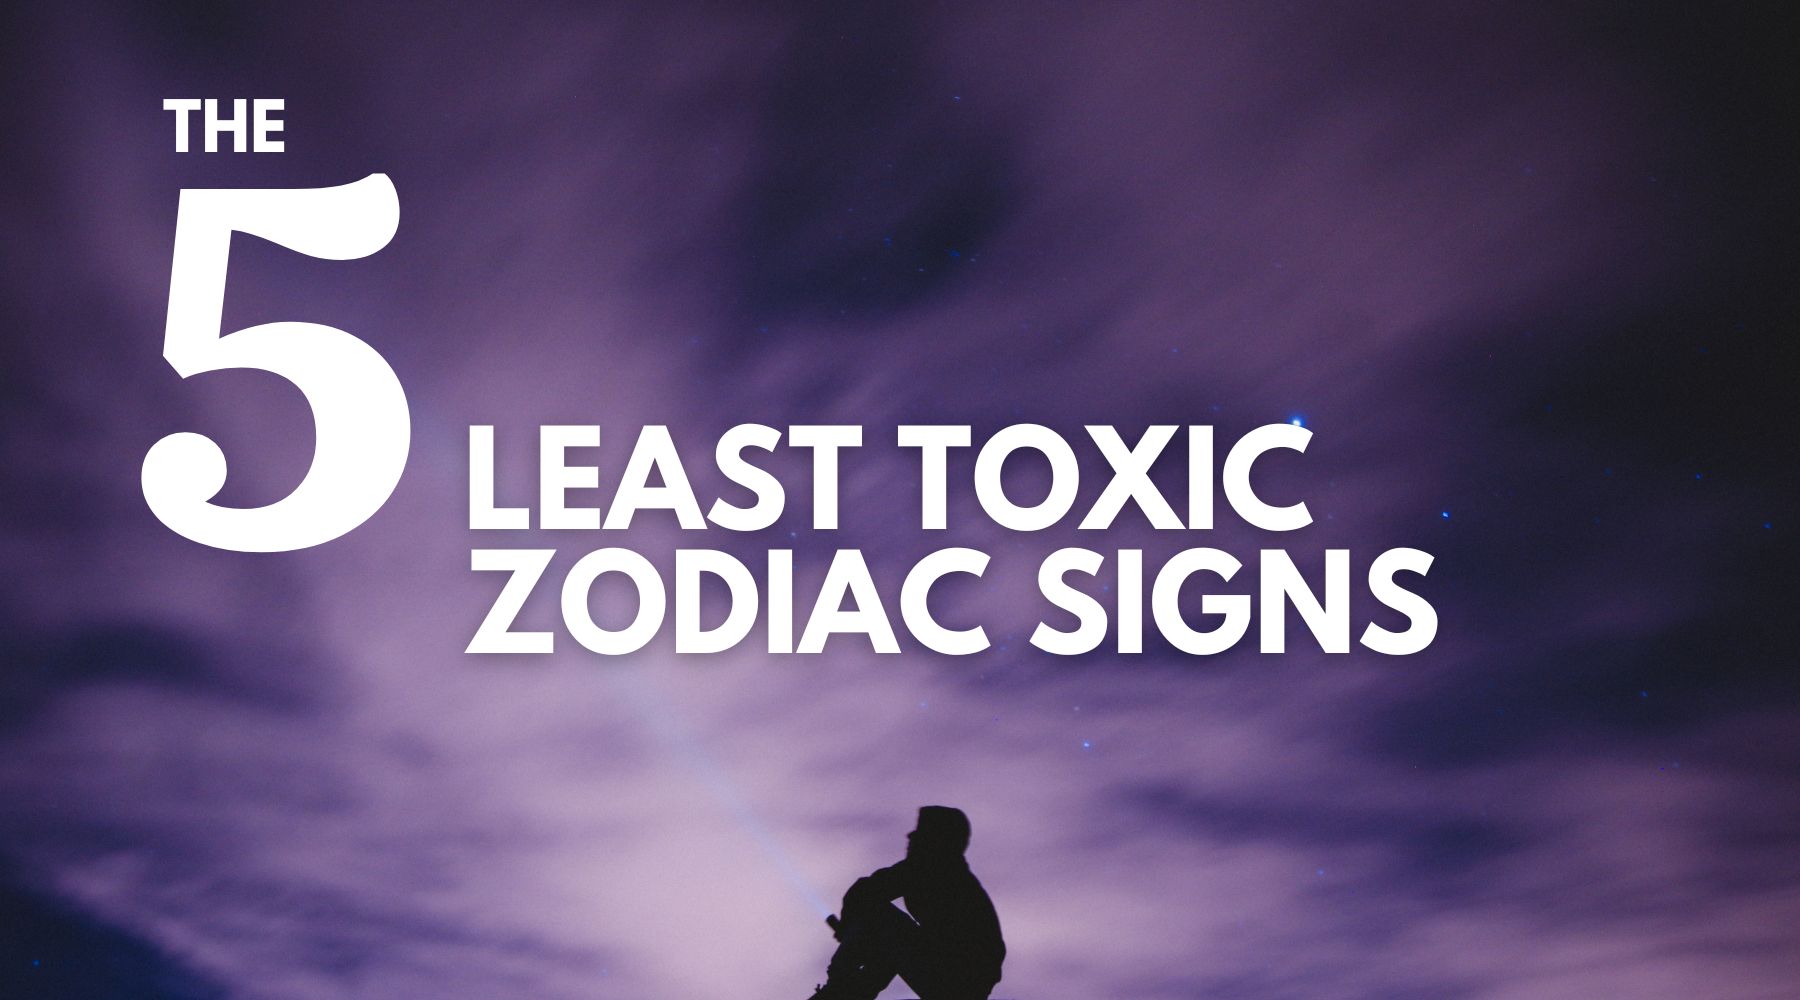 The 5 least toxic zodiac signs-The nicest zodiac signs to know